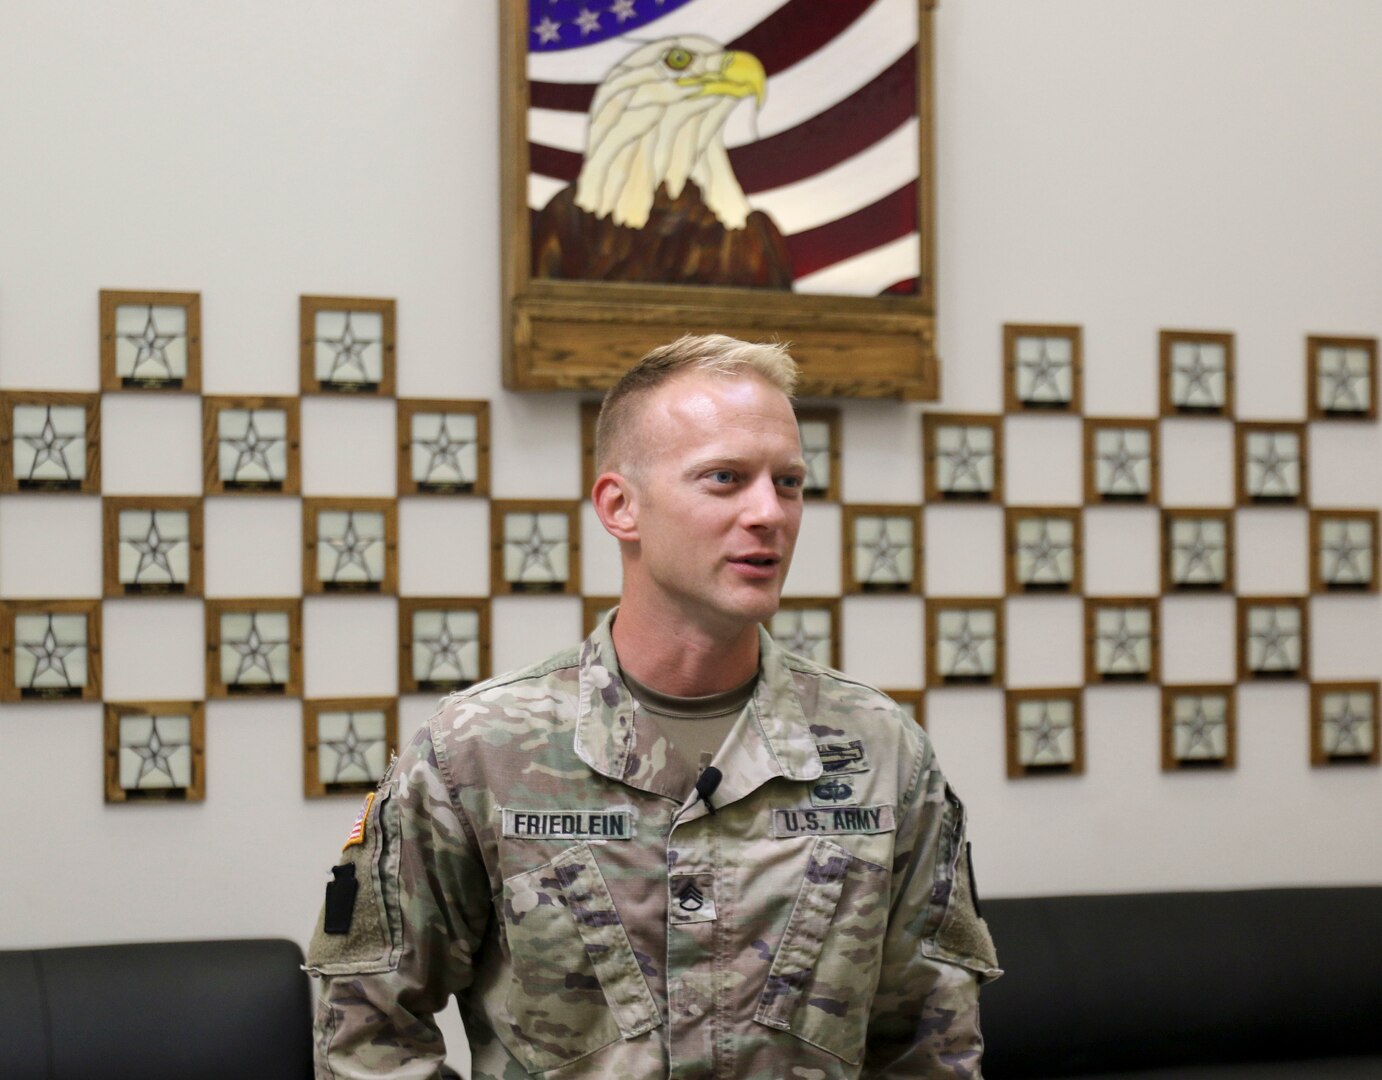 Staff Sgt. Erich Friedlein, an instructor with 1st battalion, 166th Regiment, Pennsylvania Army National Guard, is advancing to the 2019 Department of the Army Best Warrior Competition at Fort A.P. Hill, Va. and the Pentagon Oct. 6-11.